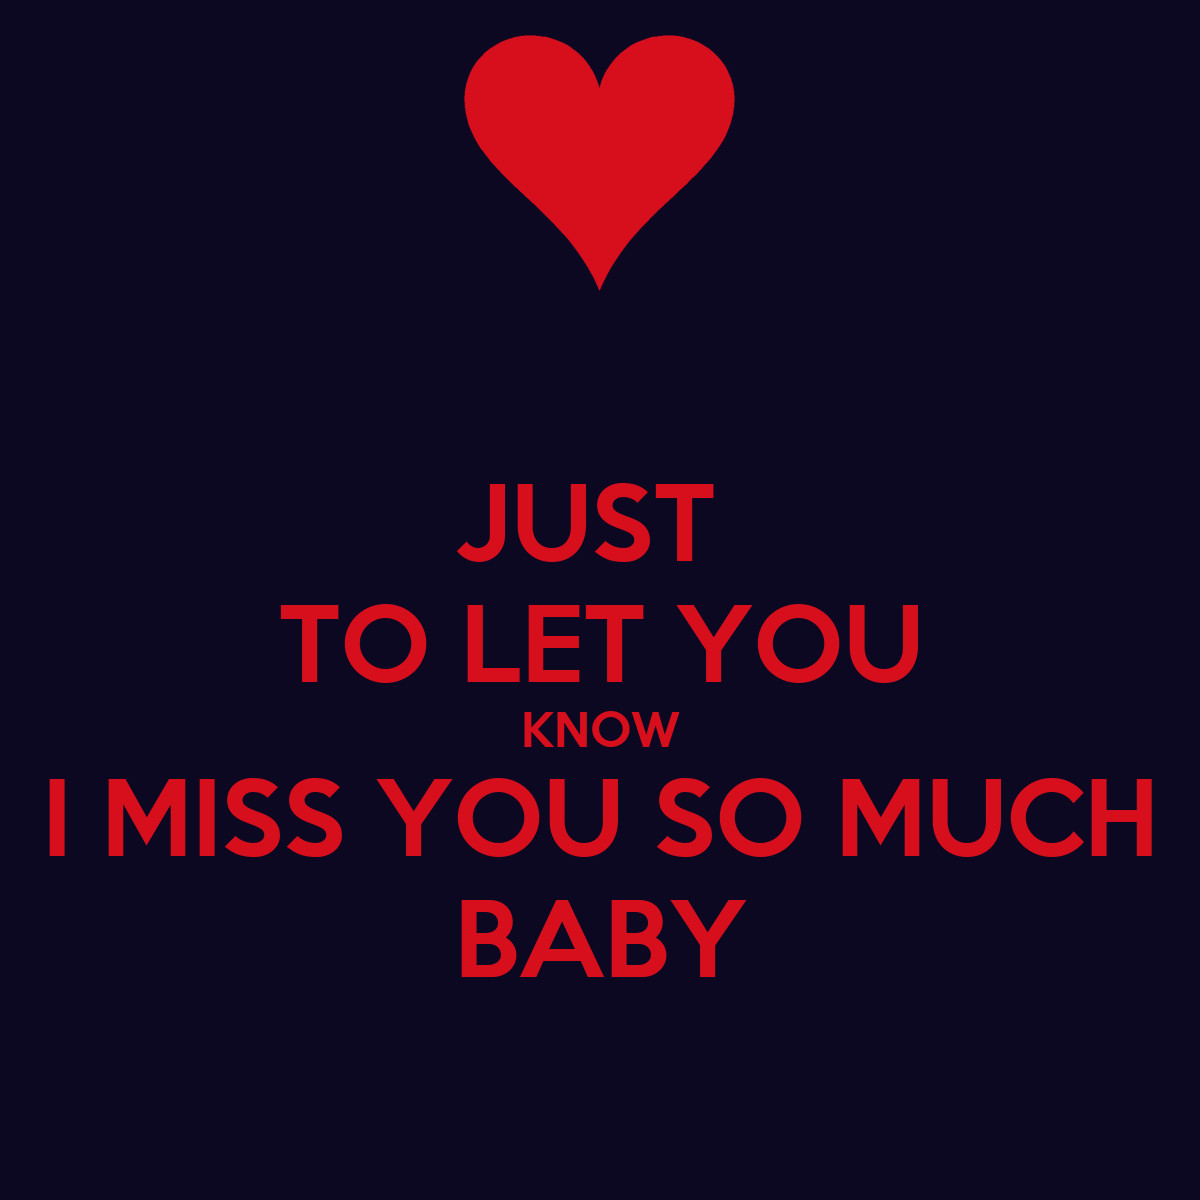 Missing You Baby Quotes
 JUST TO LET YOU KNOW I MISS YOU SO MUCH BABY Poster